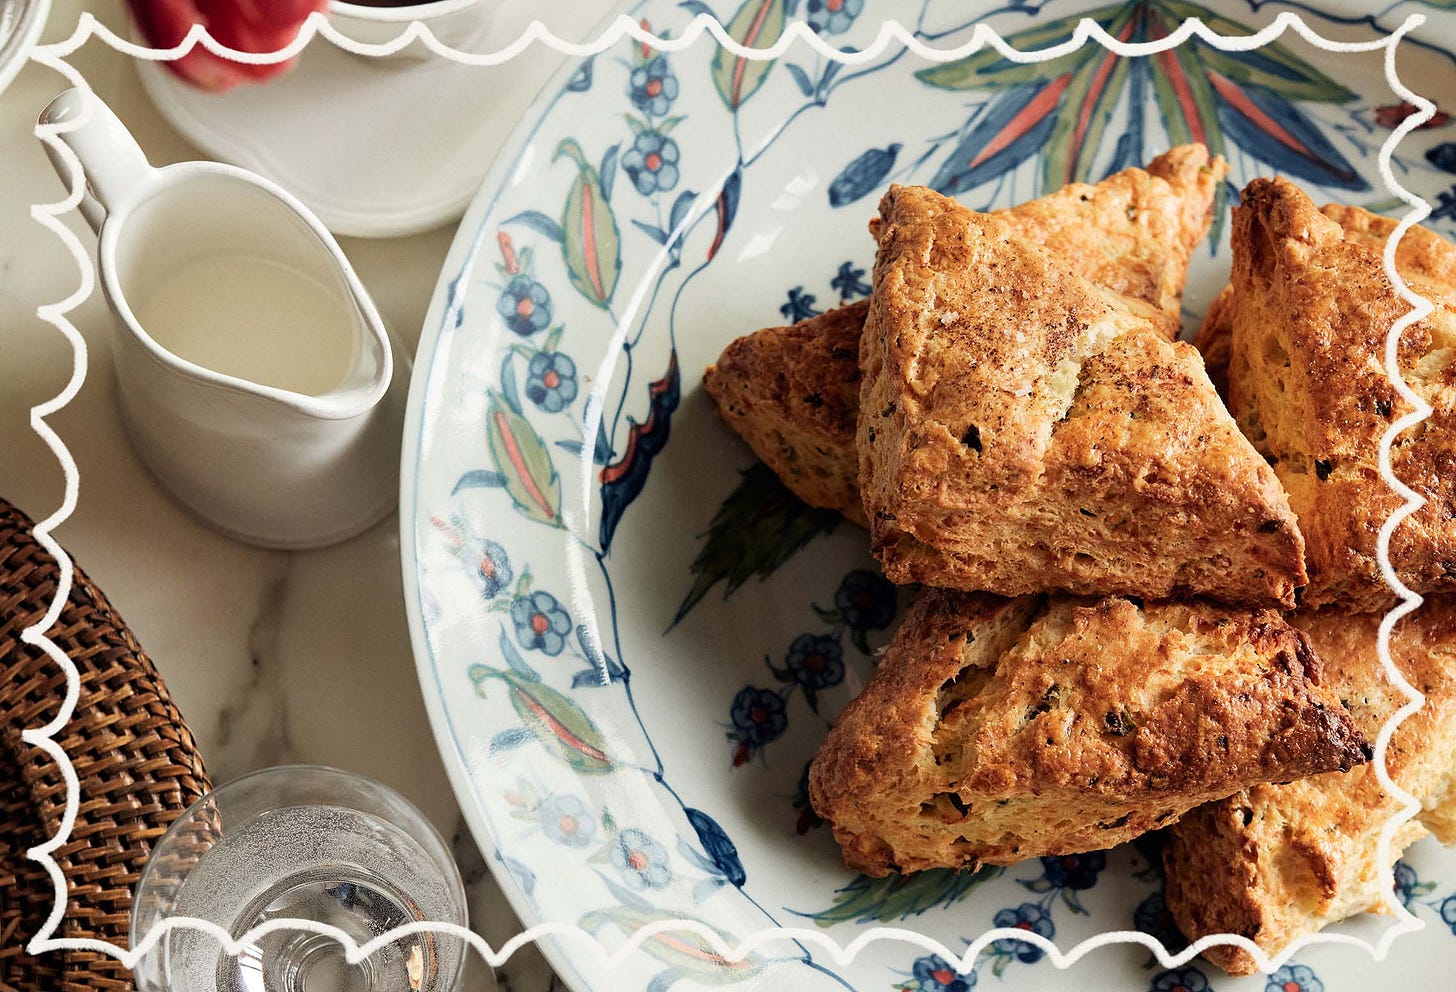 Claire Ptak's Sour Cream, Chive and Feta scones served on a blue and green patterned plate